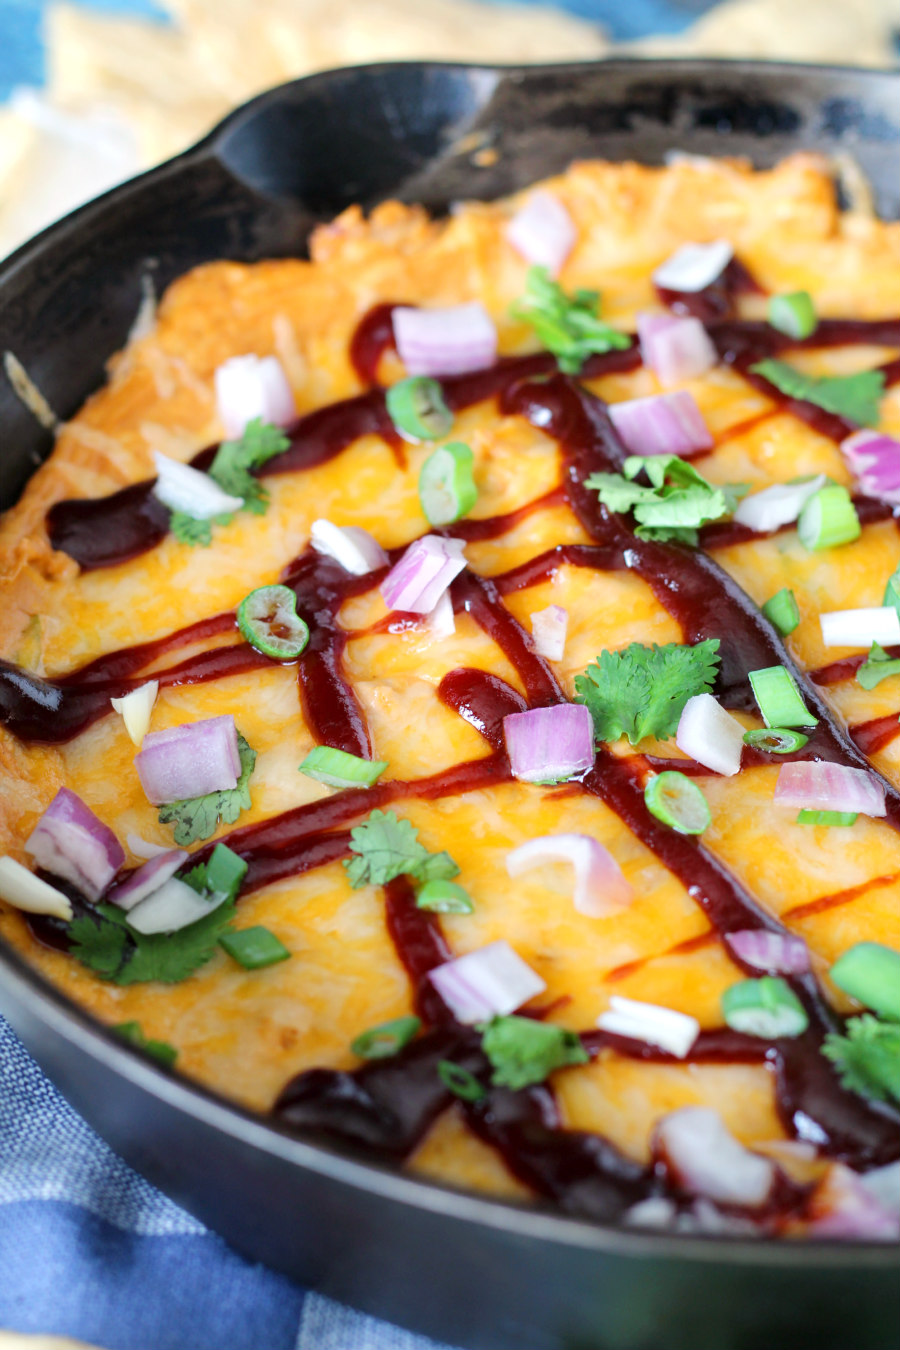 Home entertaining just got more delicious with this simple, loaded BBQ Chicken Skillet Dip. This easy appetizer uses cream cheese, rotisserie chicken, barbecue sauce, green onions, cheddar, and spices to make a hearty dip that holds up to your favorite chips!